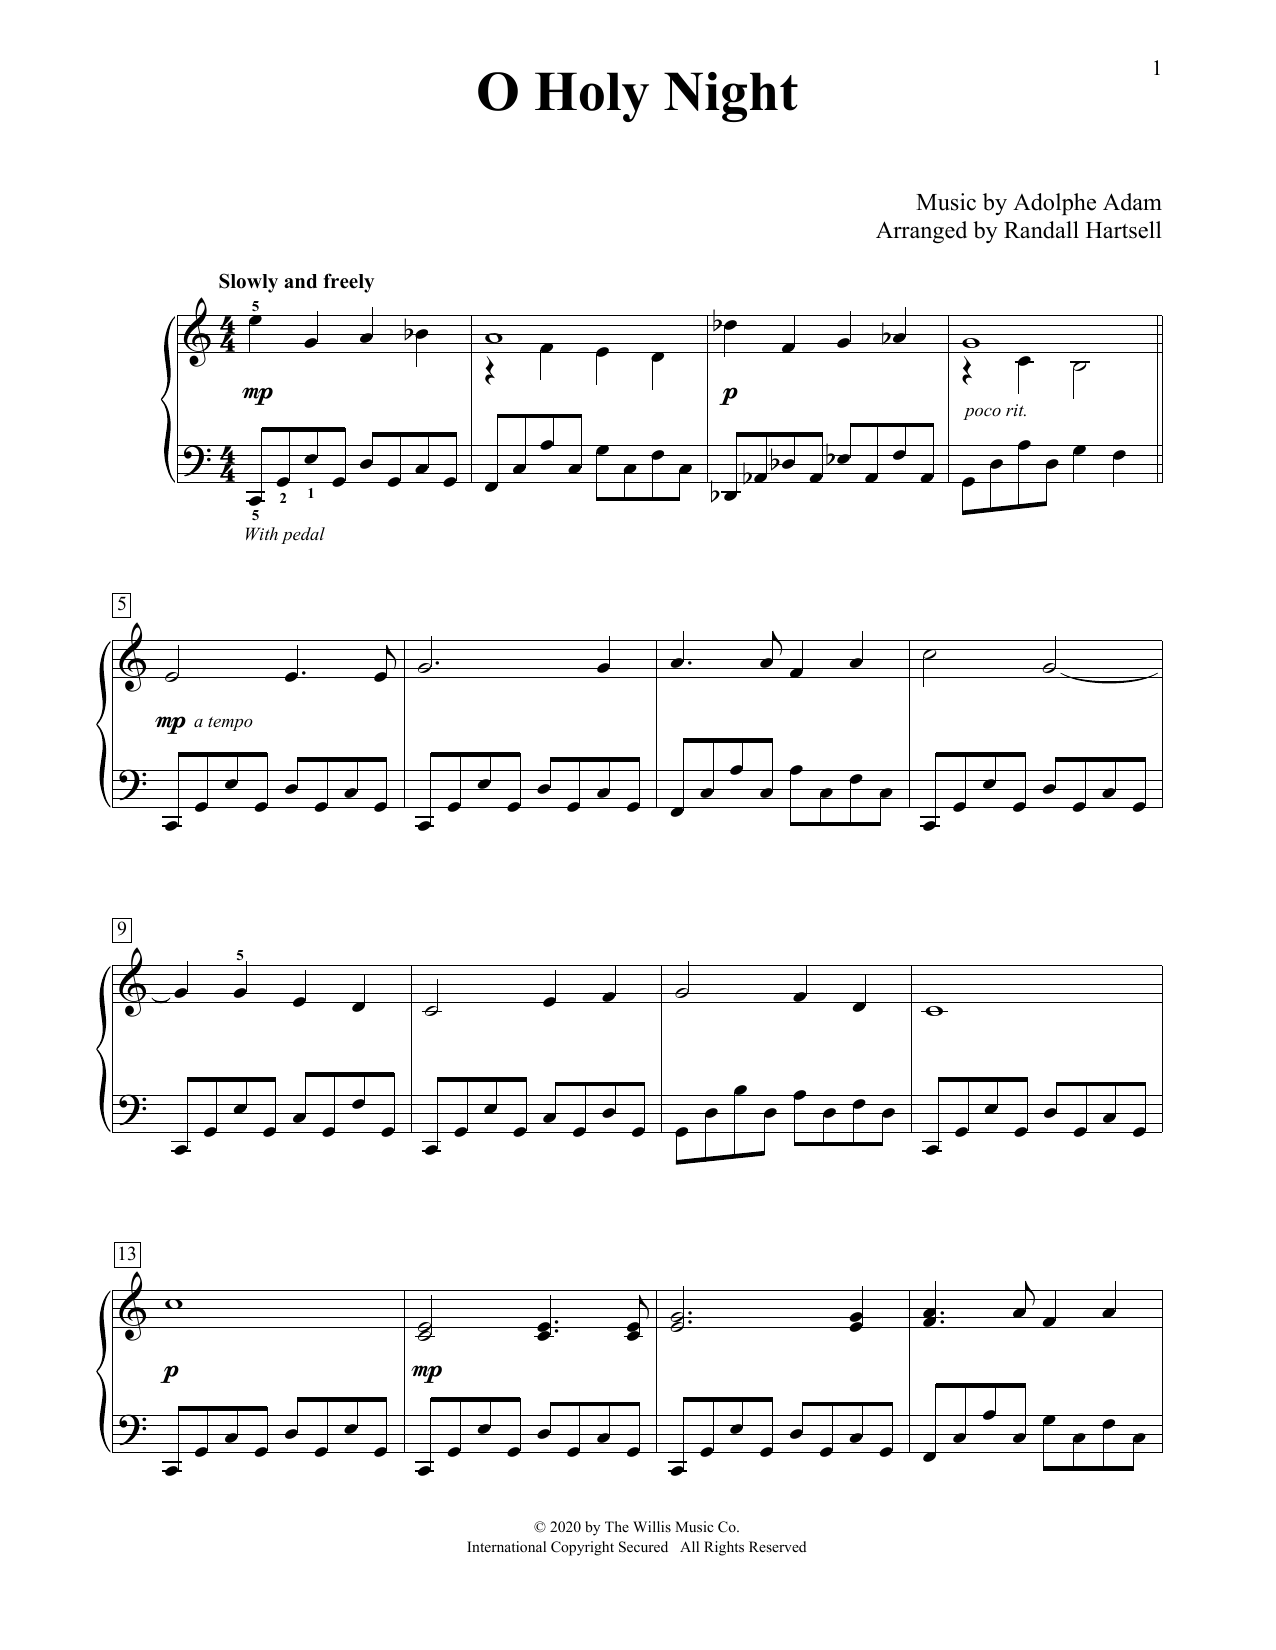 Adolphe Adam O Holy Night (arr. Randall Hartsell) sheet music notes and chords. Download Printable PDF.